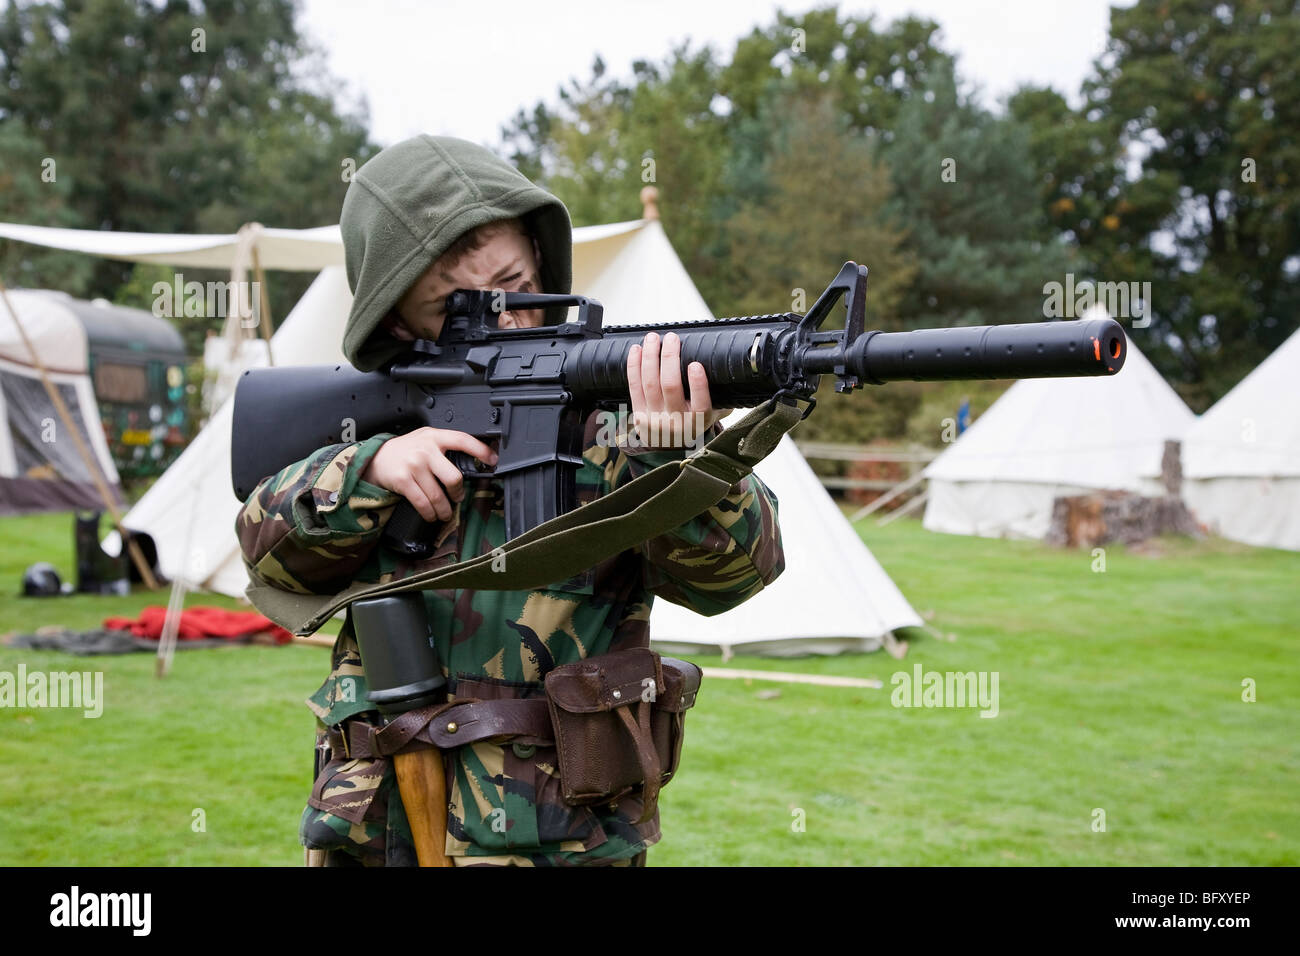 Young boy in full combat dress and armed with M16 assault rifle Stock Photo